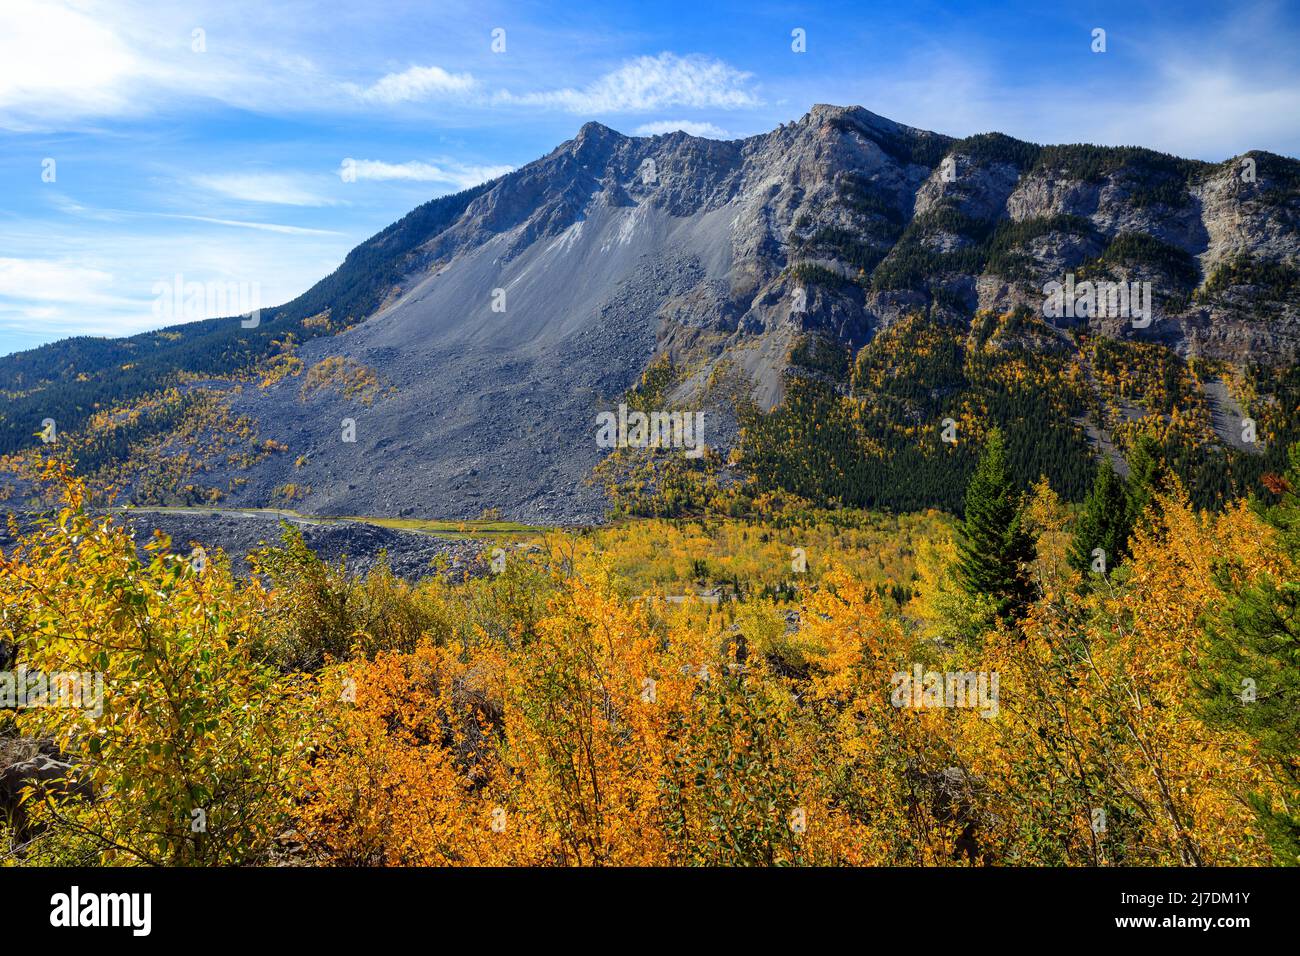 The Frank Slide was a massive rockslide that buried part of the mining town of Frank in the province of Alberta Canada, at 4:10 a.m. on April 29, 1903 Stock Photo